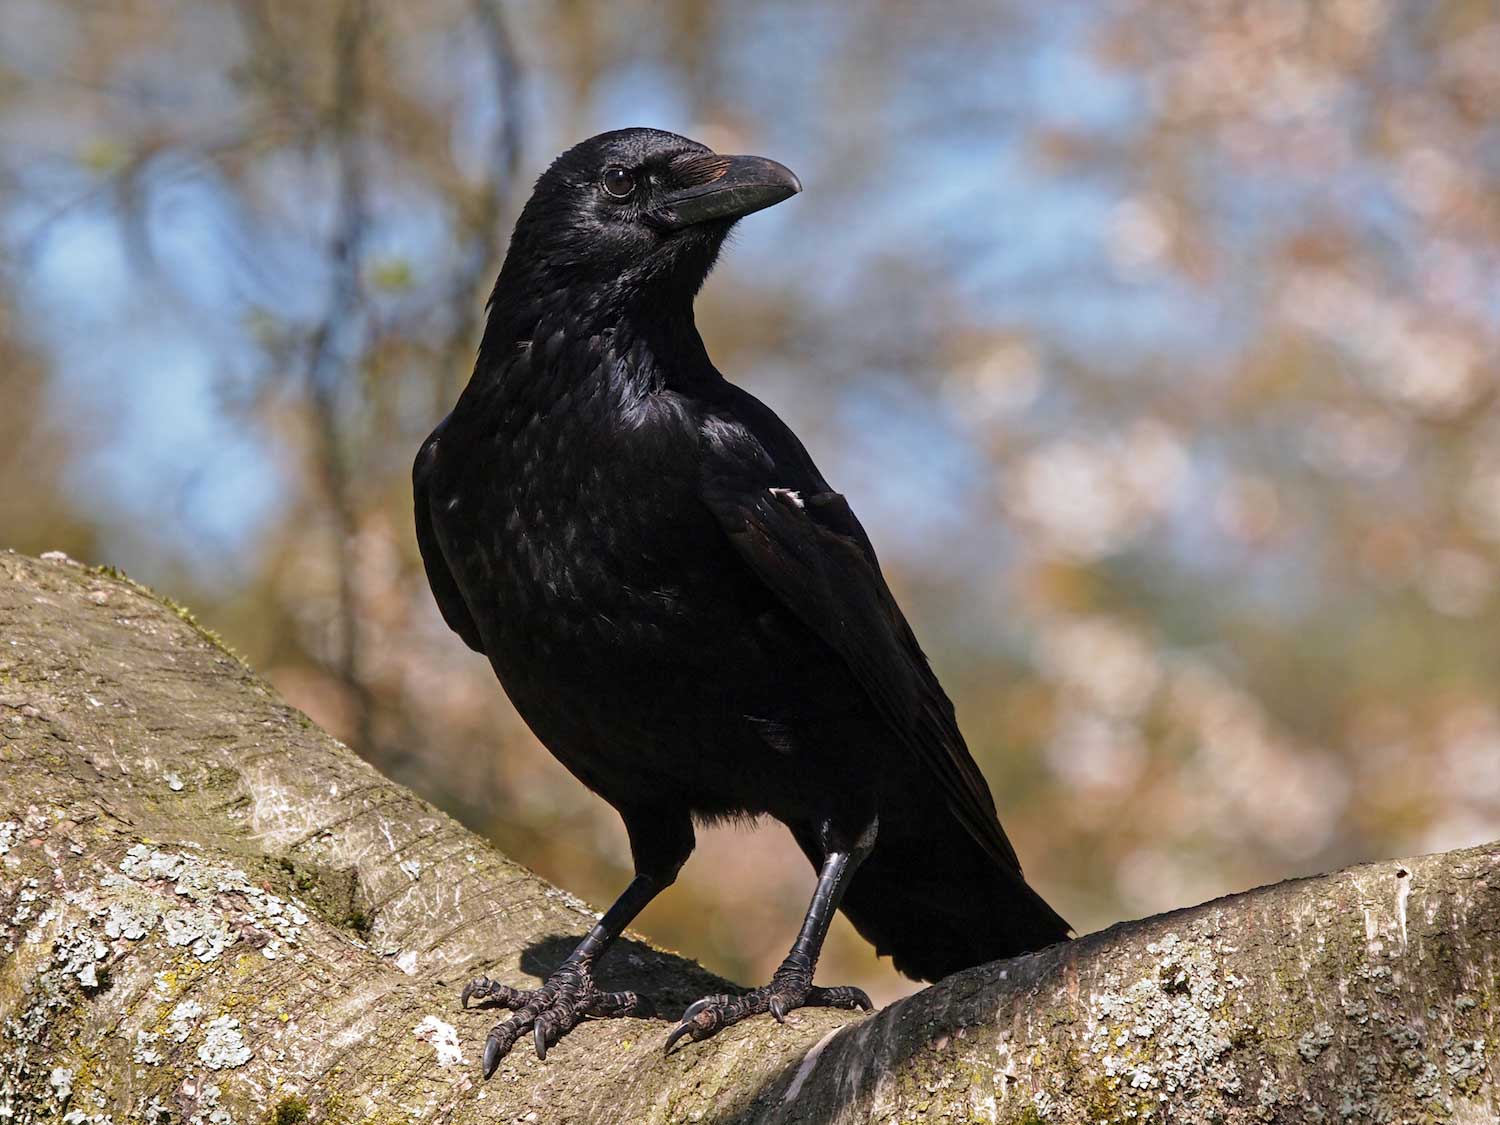 A crow on a branch.